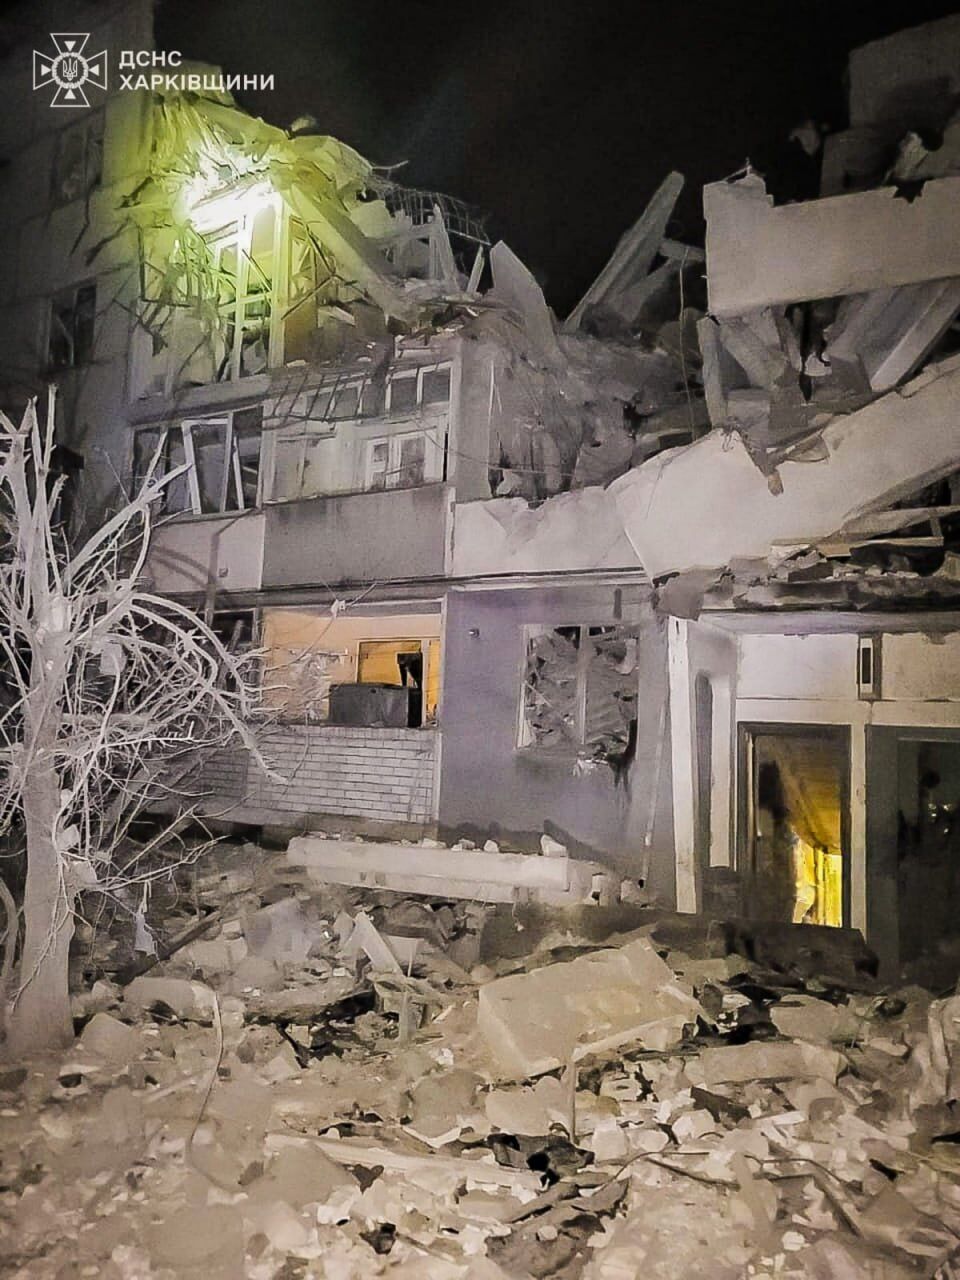 The occupants drop a guided bomb on a high-rise building in Kupiansk, Kharkiv: a woman dies under the rubble. Photo